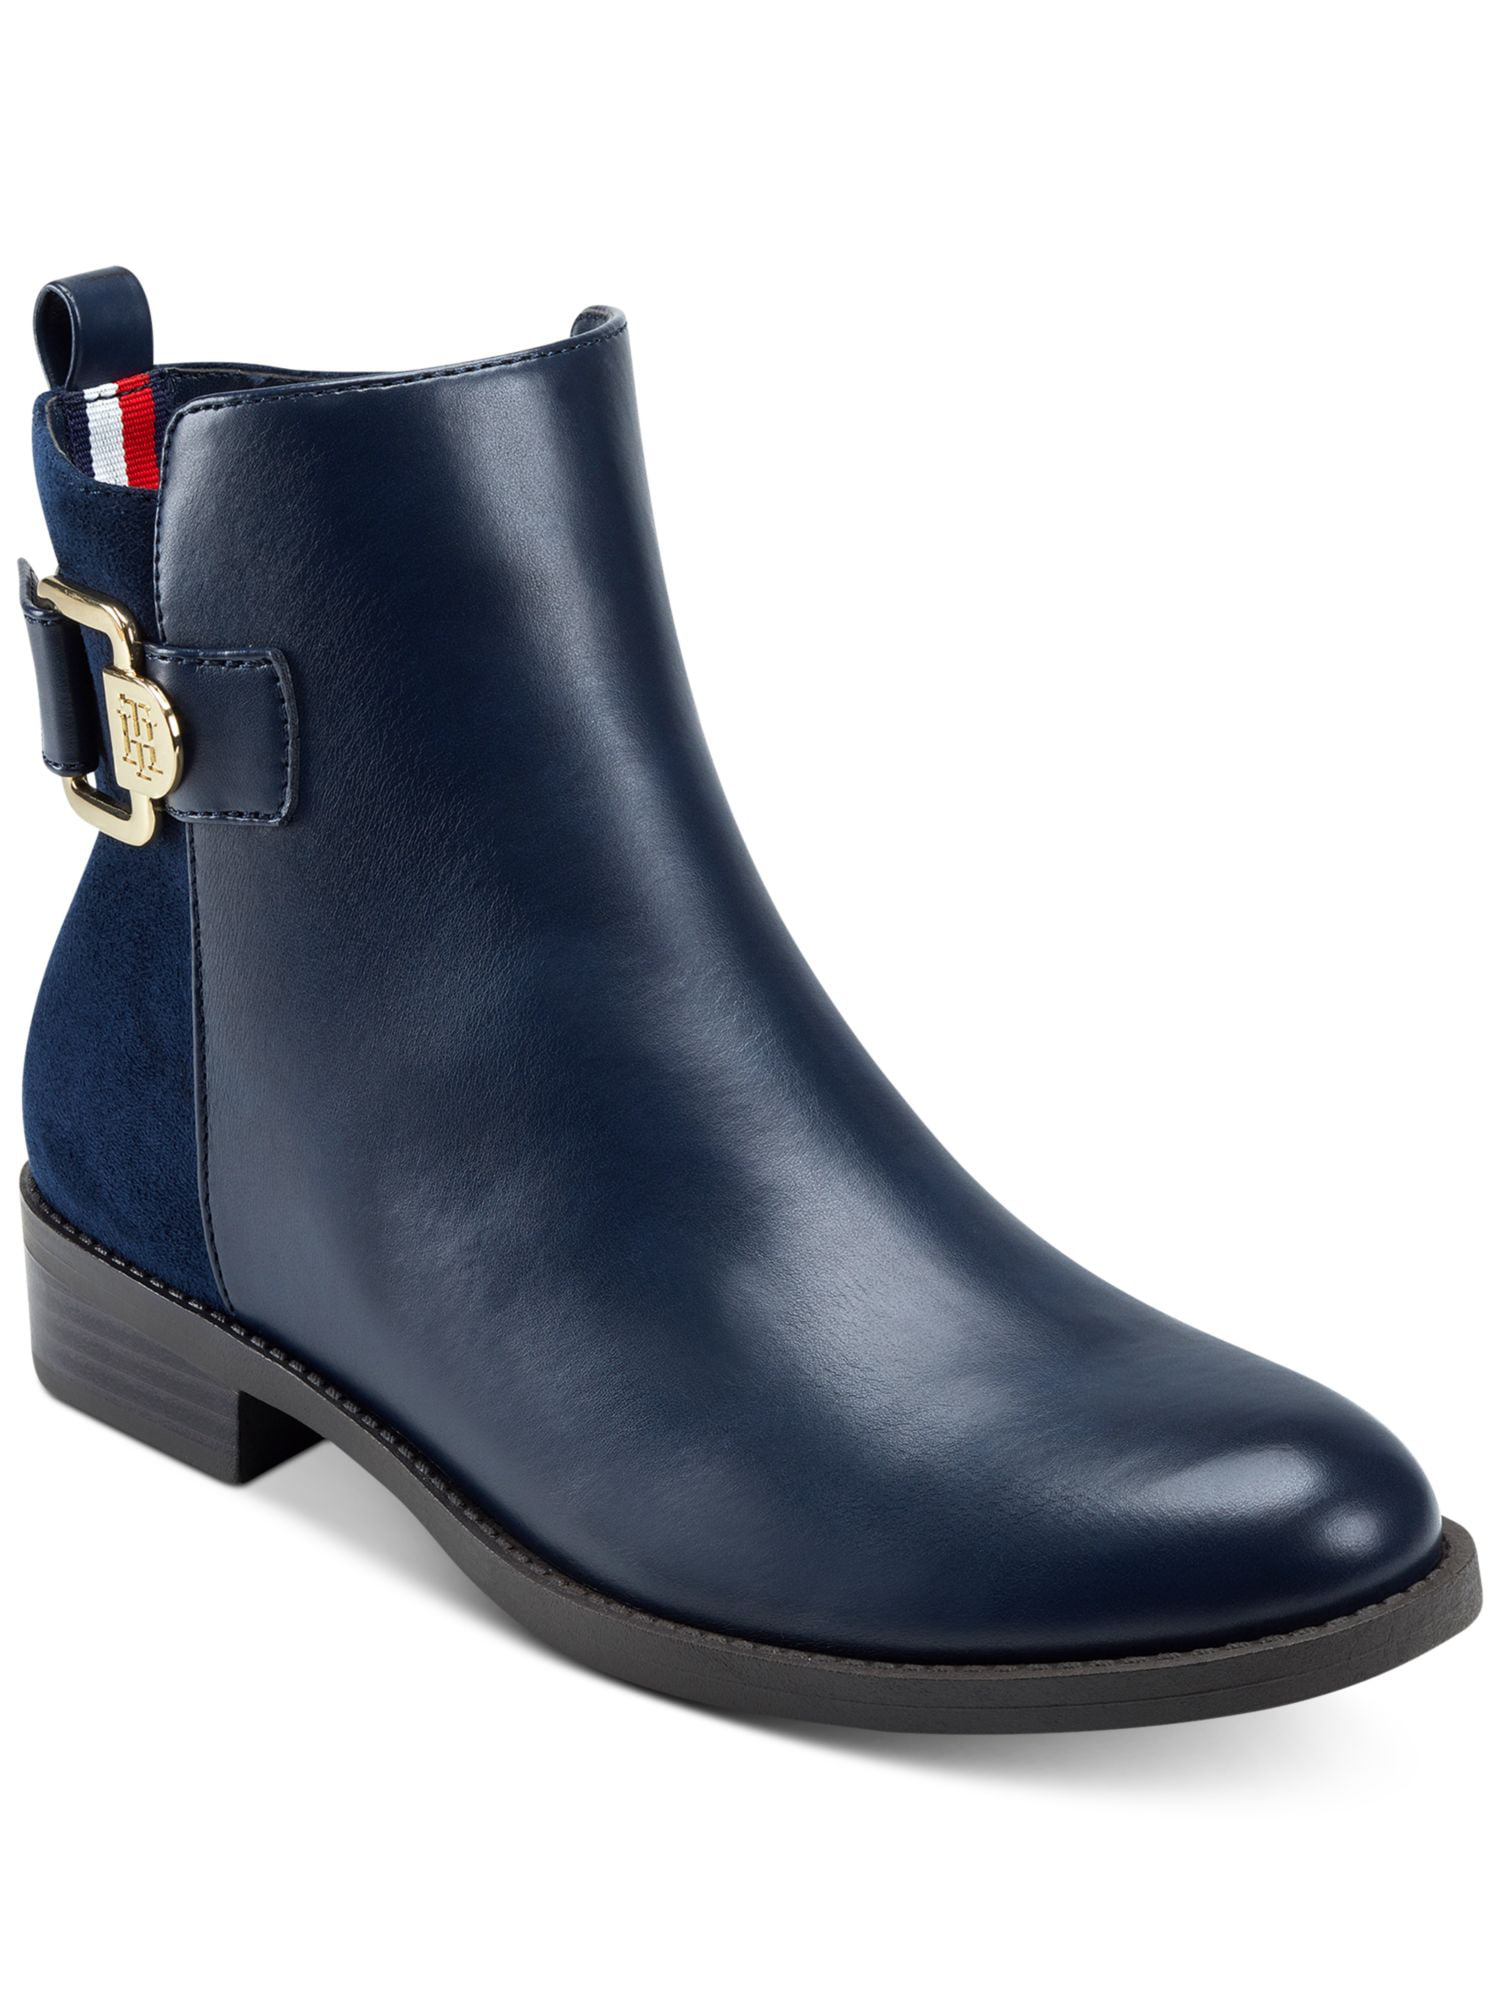 Tommy Hilfiger Womens Inella Faux Leather Almond Toe Booties -